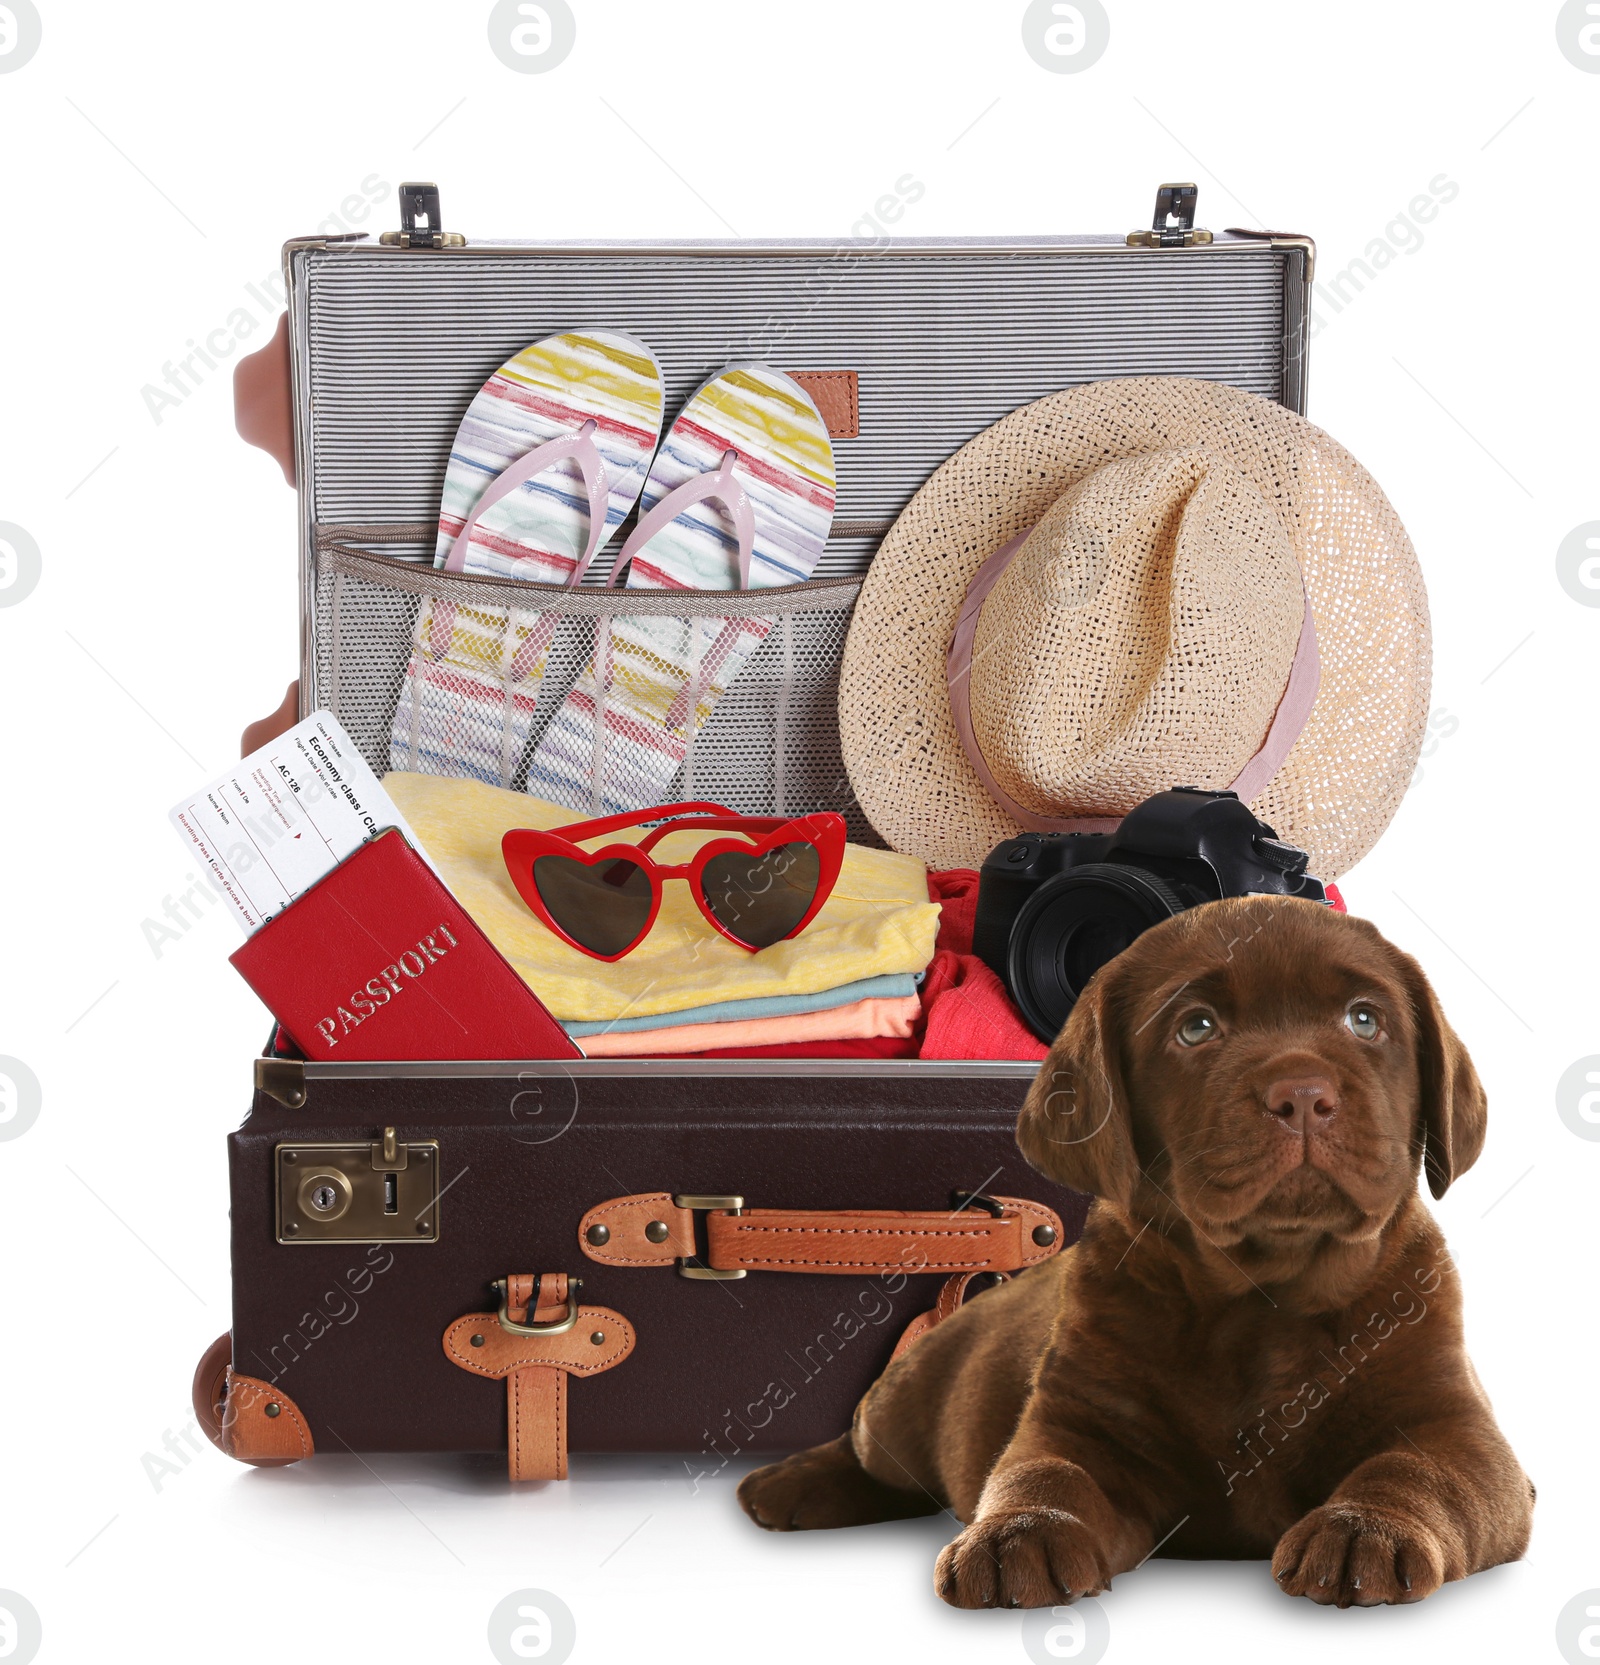 Image of Cute dog and old fashioned suitcase packed for journey on white background. Travelling with pet